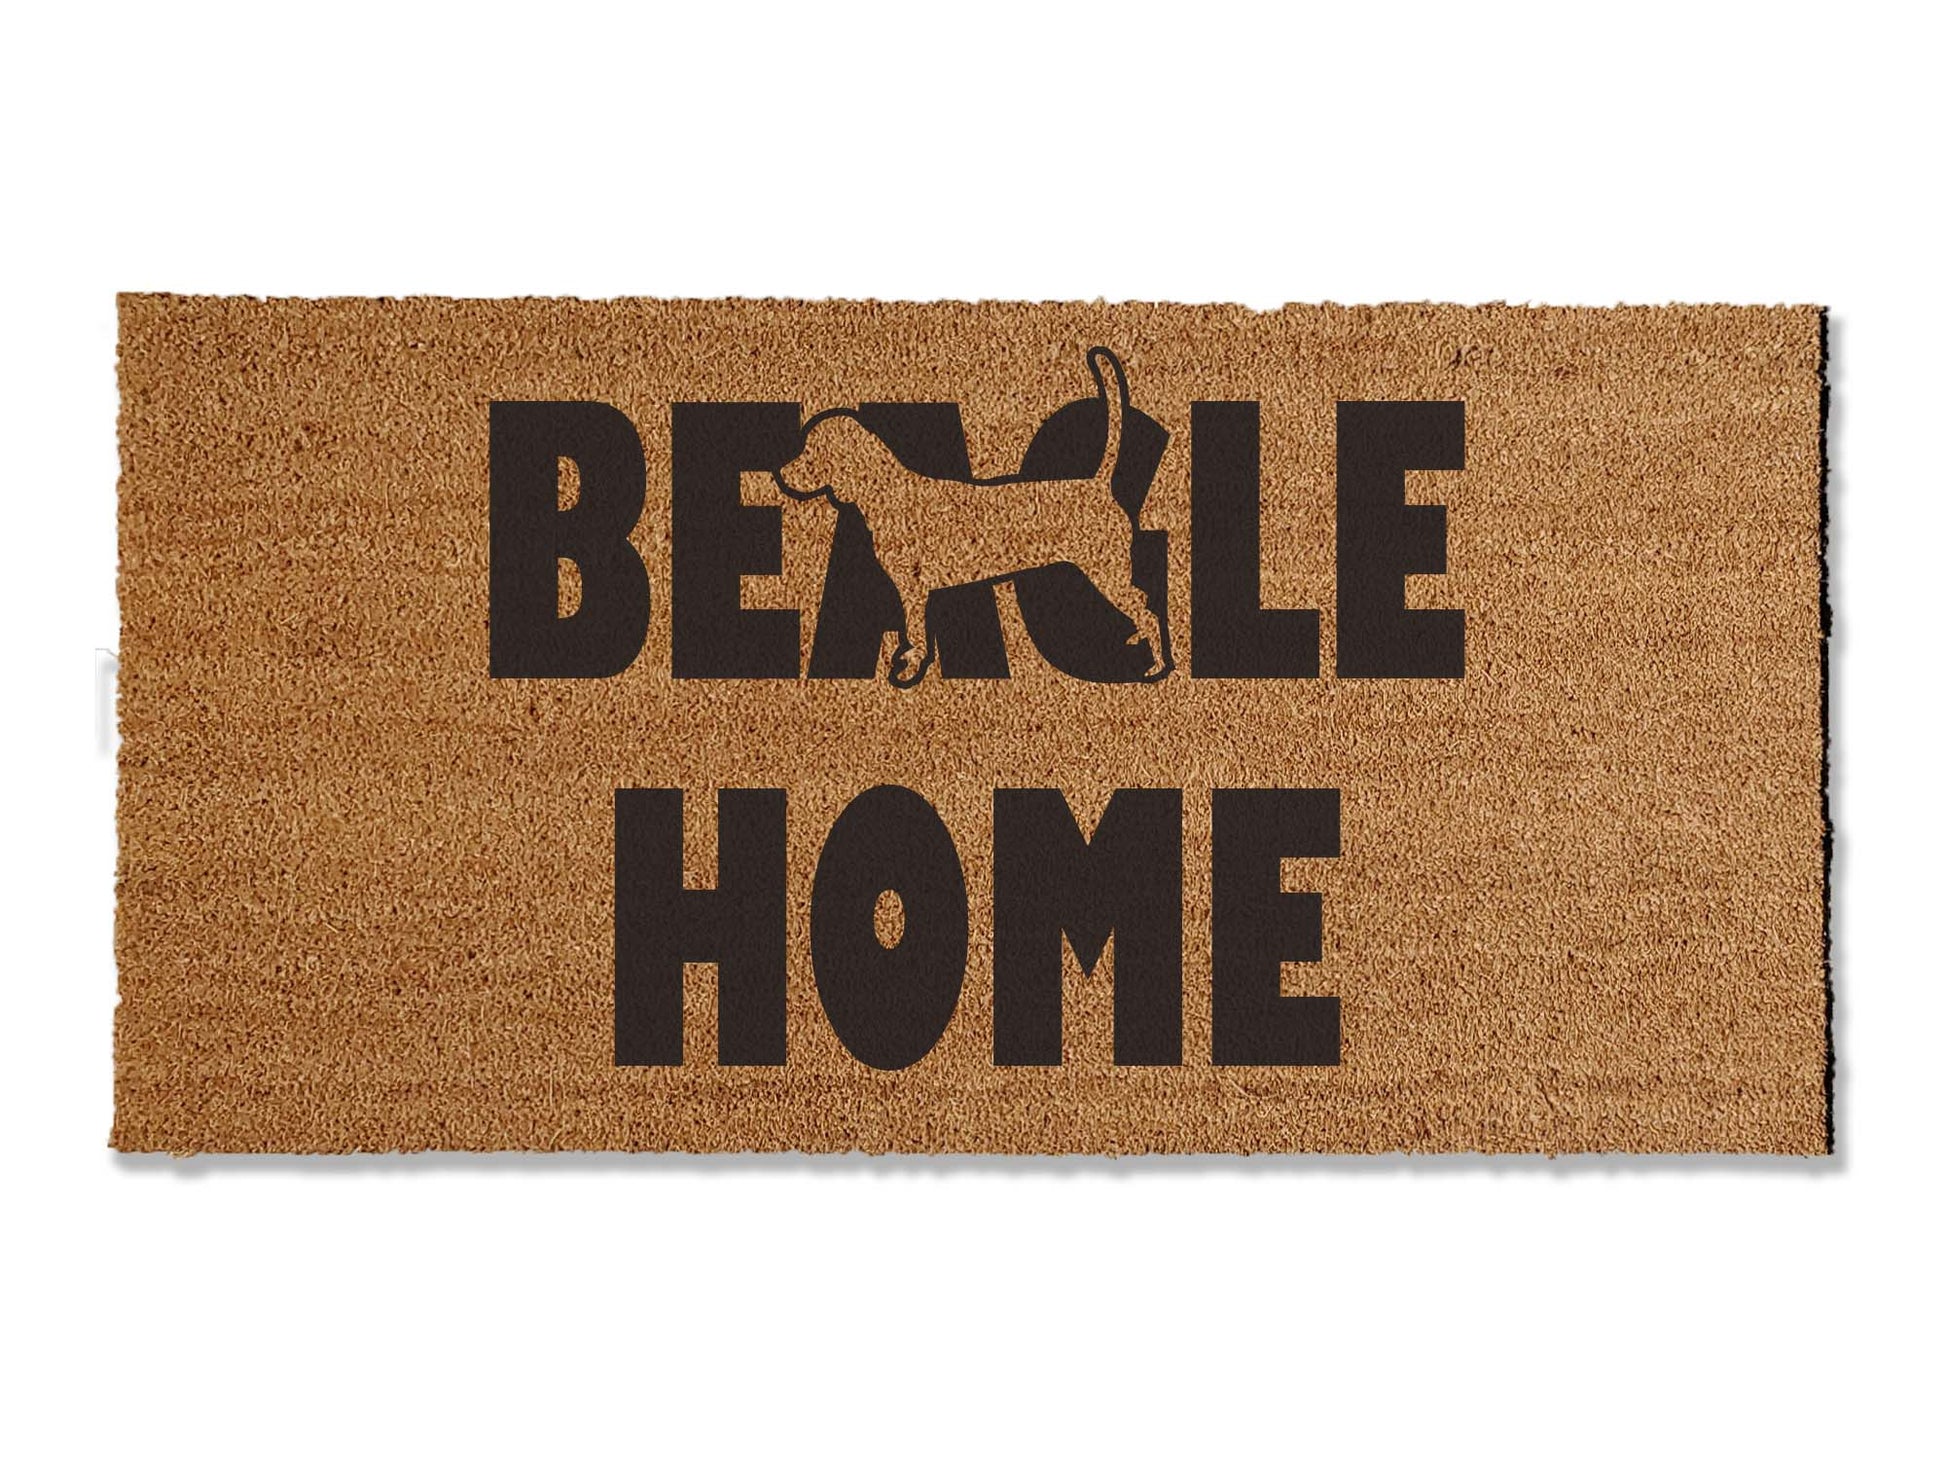 A coir doormat that is 24 inches by 48 inches what the text BEAGLE HOME on it and the silhouette of a beagle.